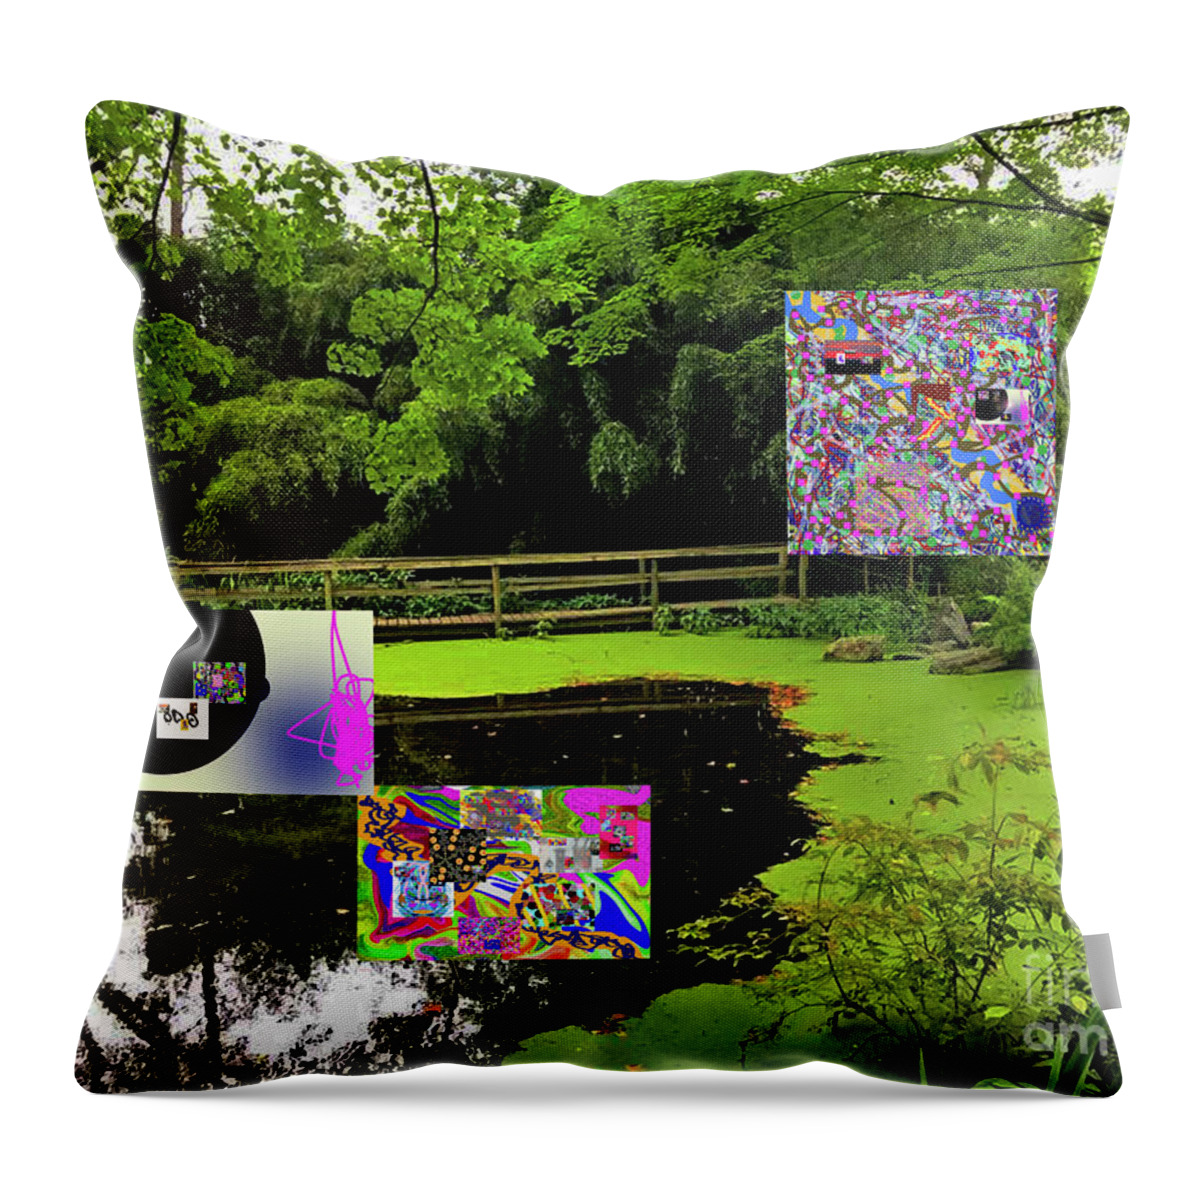 Walter Paul Bebirian: Volord Kingdom Art Collection Grand Gallery Throw Pillow featuring the digital art 10-10-2019f by Walter Paul Bebirian